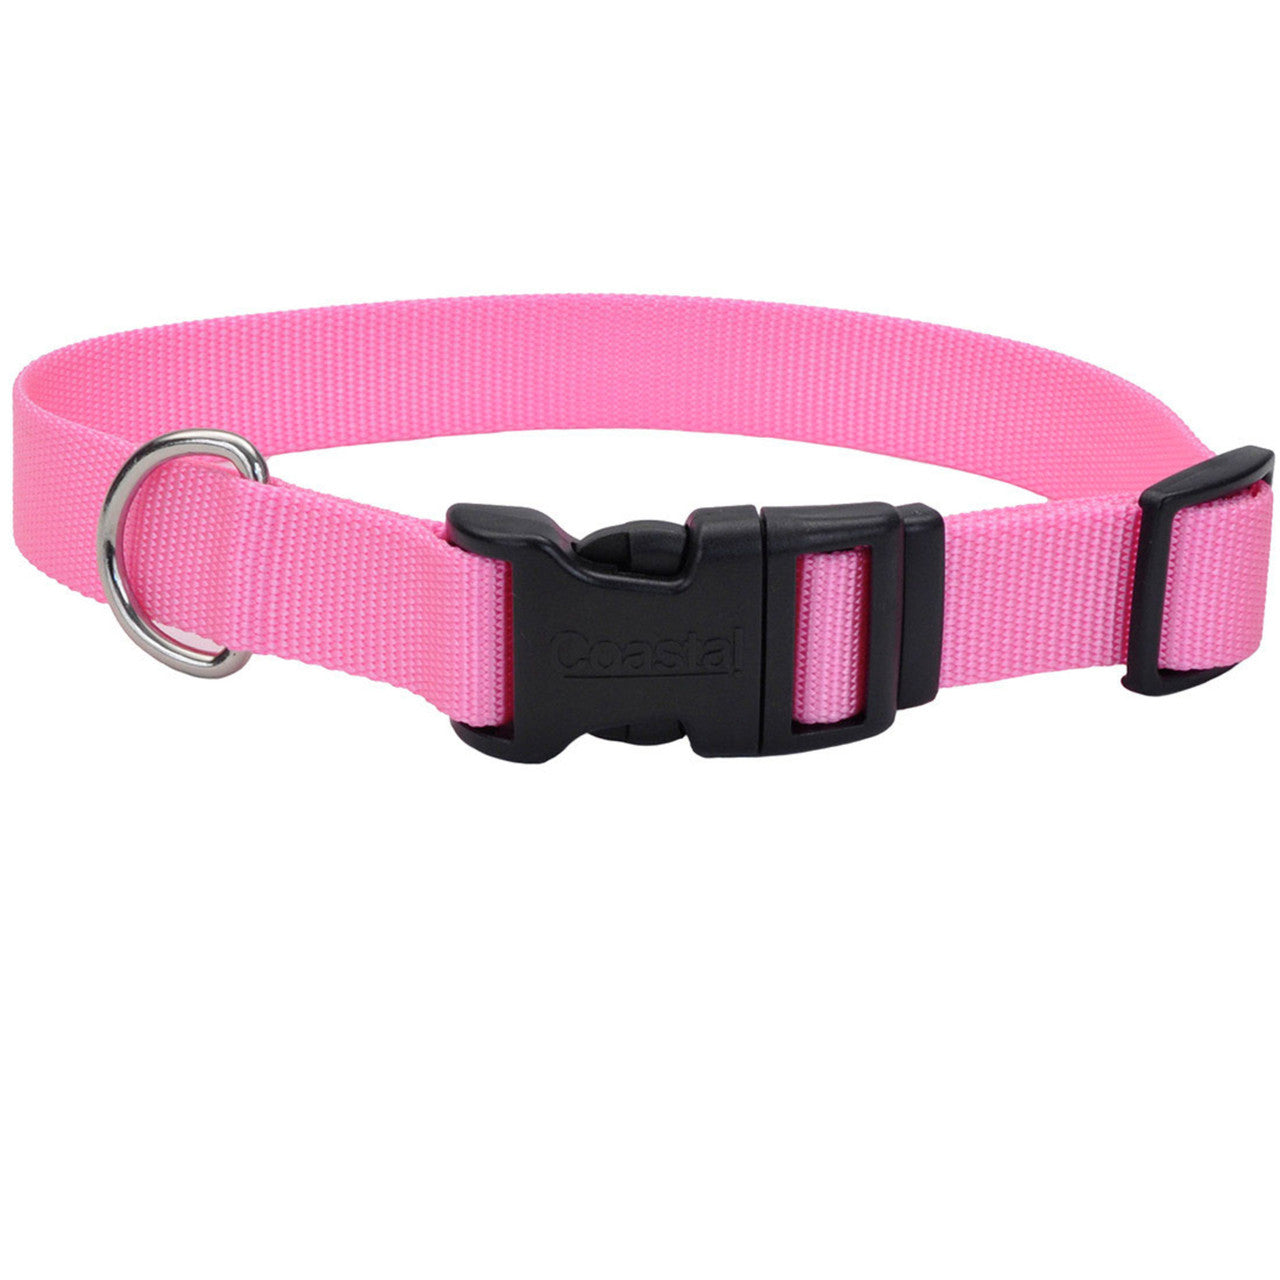 Coastal Adjustable Nylon Dog Collar with Plastic Buckle Bright Pink 5/8 in x 10-14 in